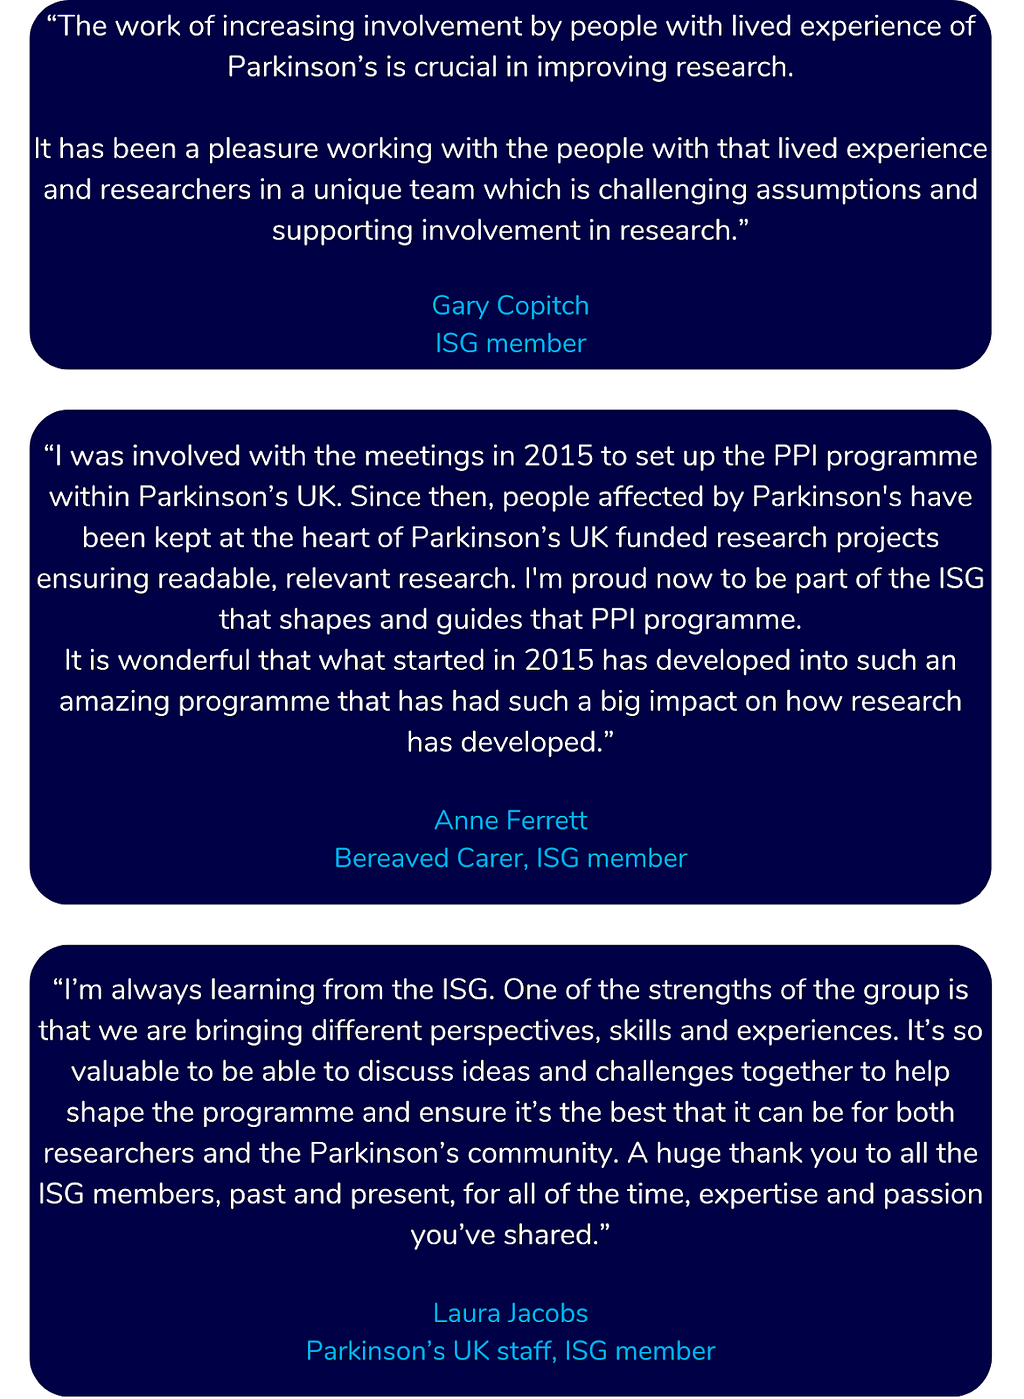 Quotes from Laura Jacobs, Gary Copitch and Anne Ferrett ISG members. Gary says: It has been a pleasure working with the people with that lived experience and researchers in a unique team which is challenging assumptions and supporting involvement in research. Anne says: It is wonderful that what started in 2015 has developed into such an amazing programme that has had such a big impact on how research has developed. Laura thanks ISG members past and present for their expertise and passion